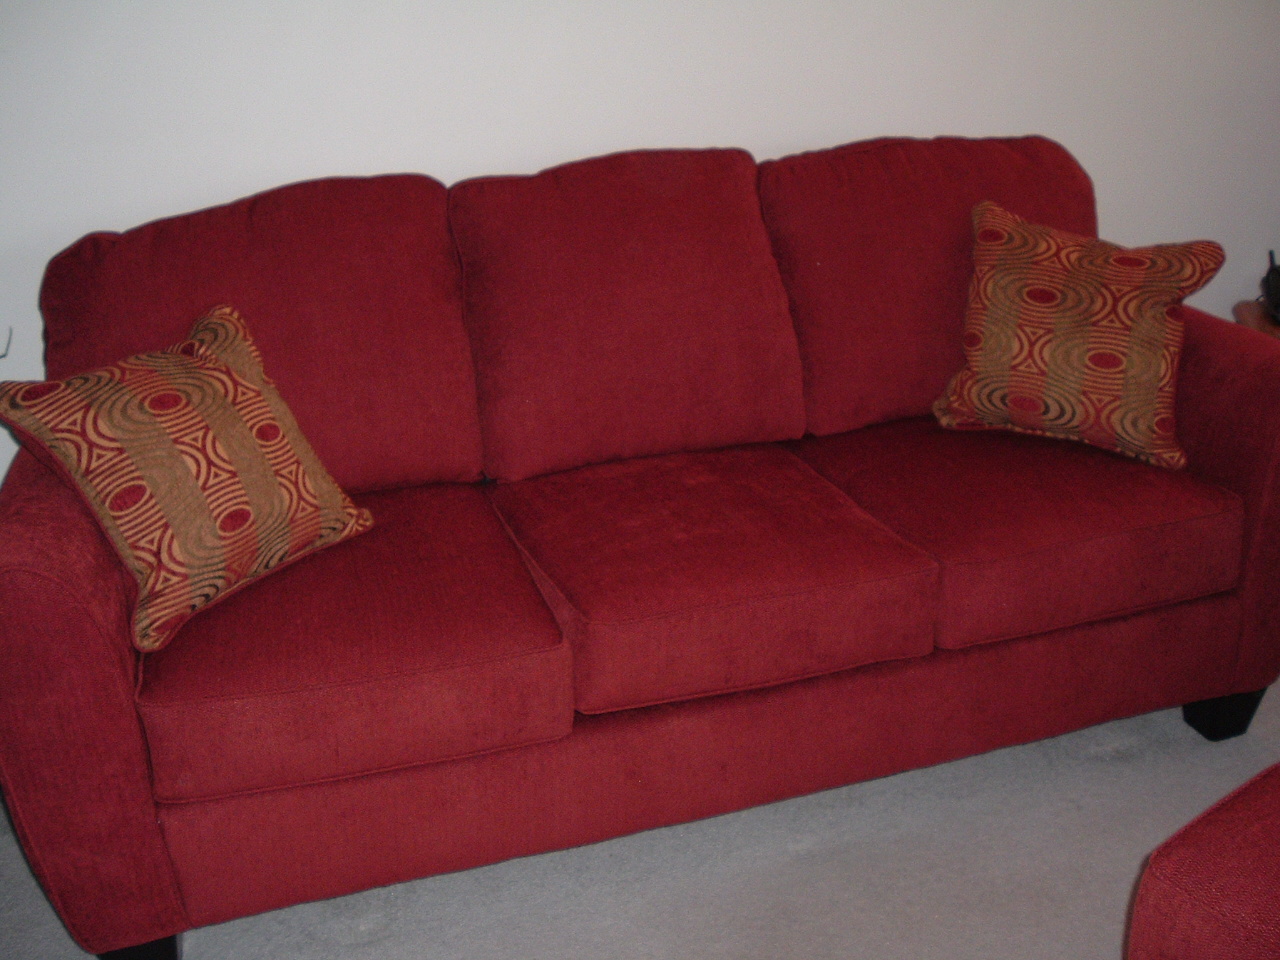 a red couch has brown and gold pillows